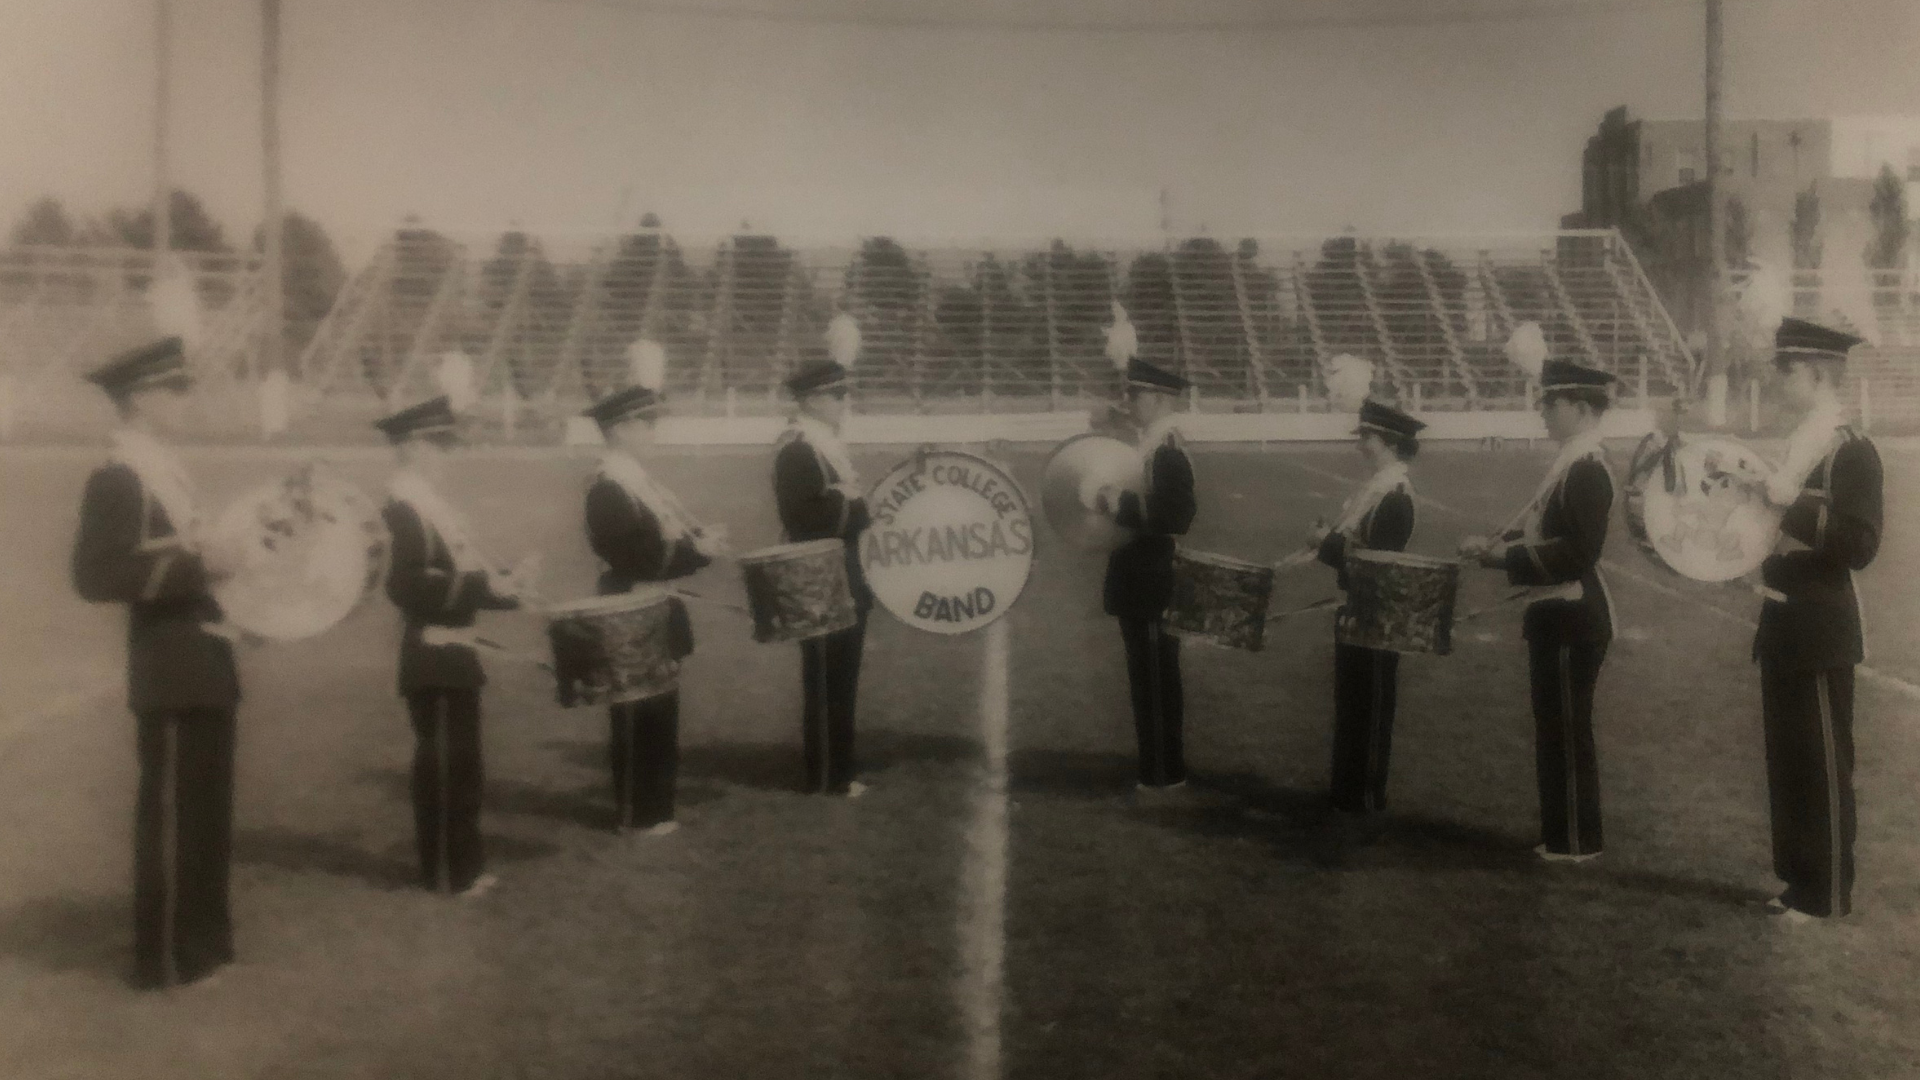 Historical photo of the marching band drumline on the field in a V shape.  The middle drum head says Arkansas State College Band.  There are four snare drums, a cymbol player, and two other bass drums.